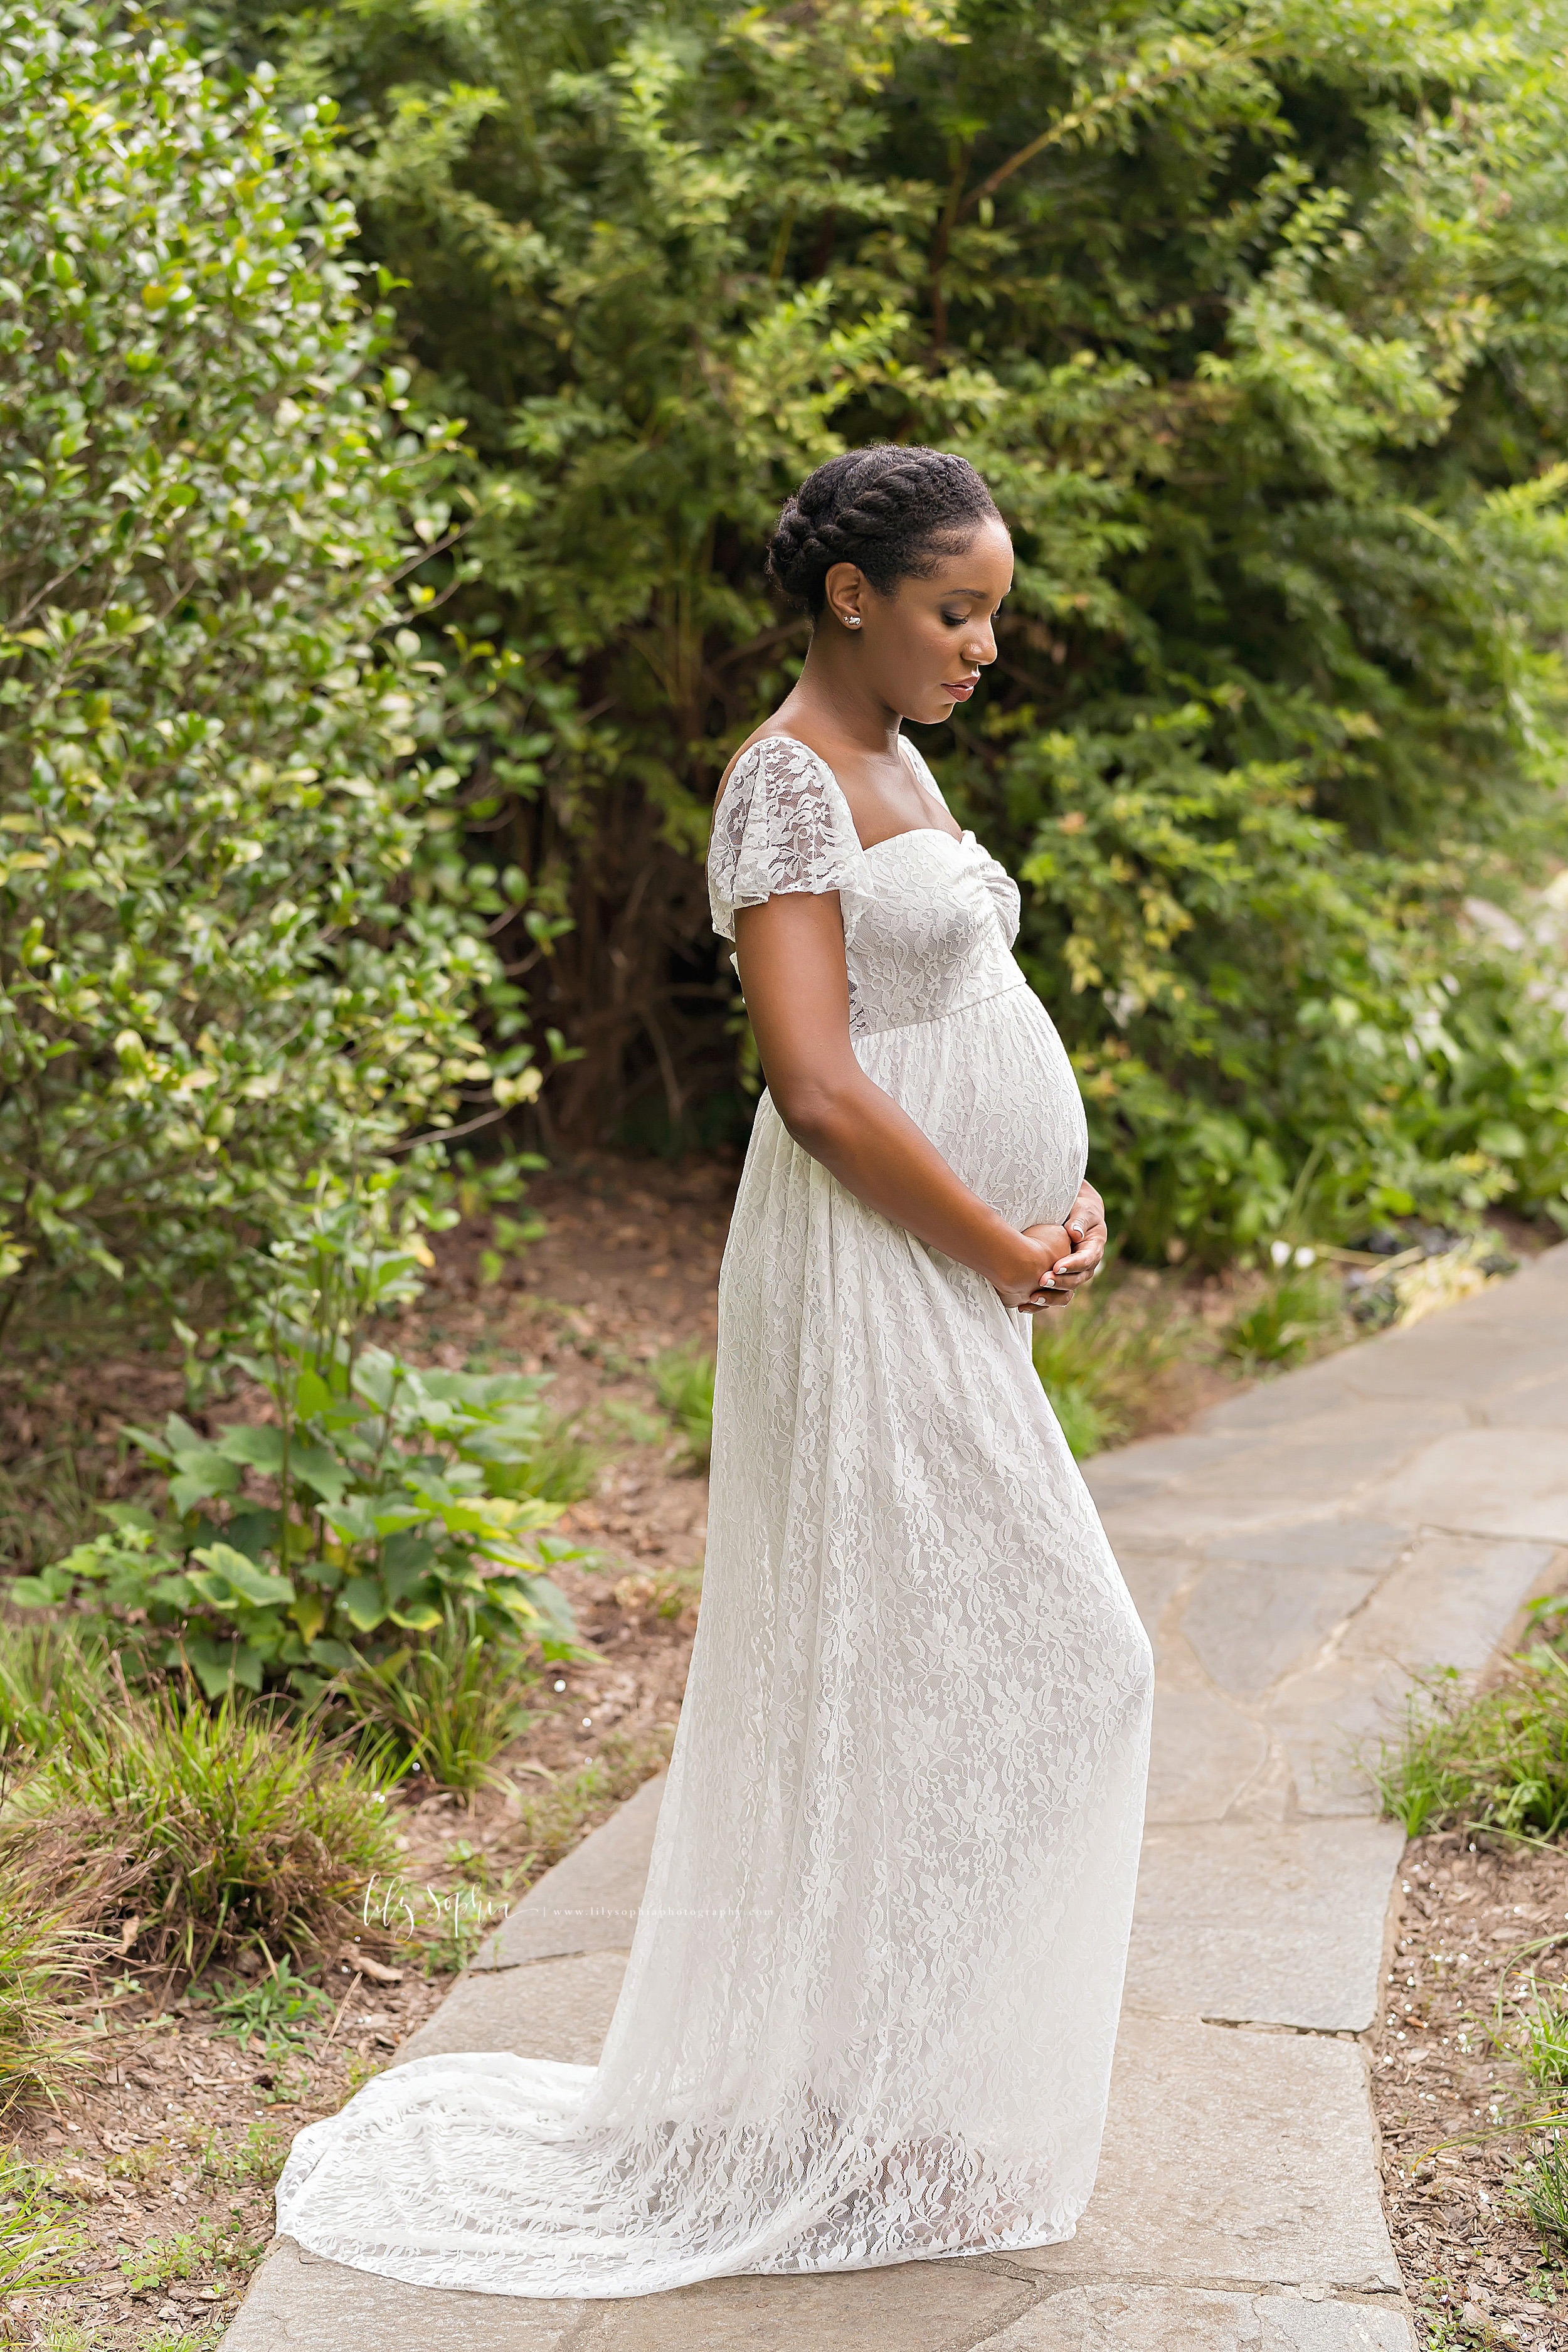  Maternity photo of a contemplative African-American mother as she stands on a stone path in an Atlanta garden and embraces her newborn in utero by holding the base of her belly. 